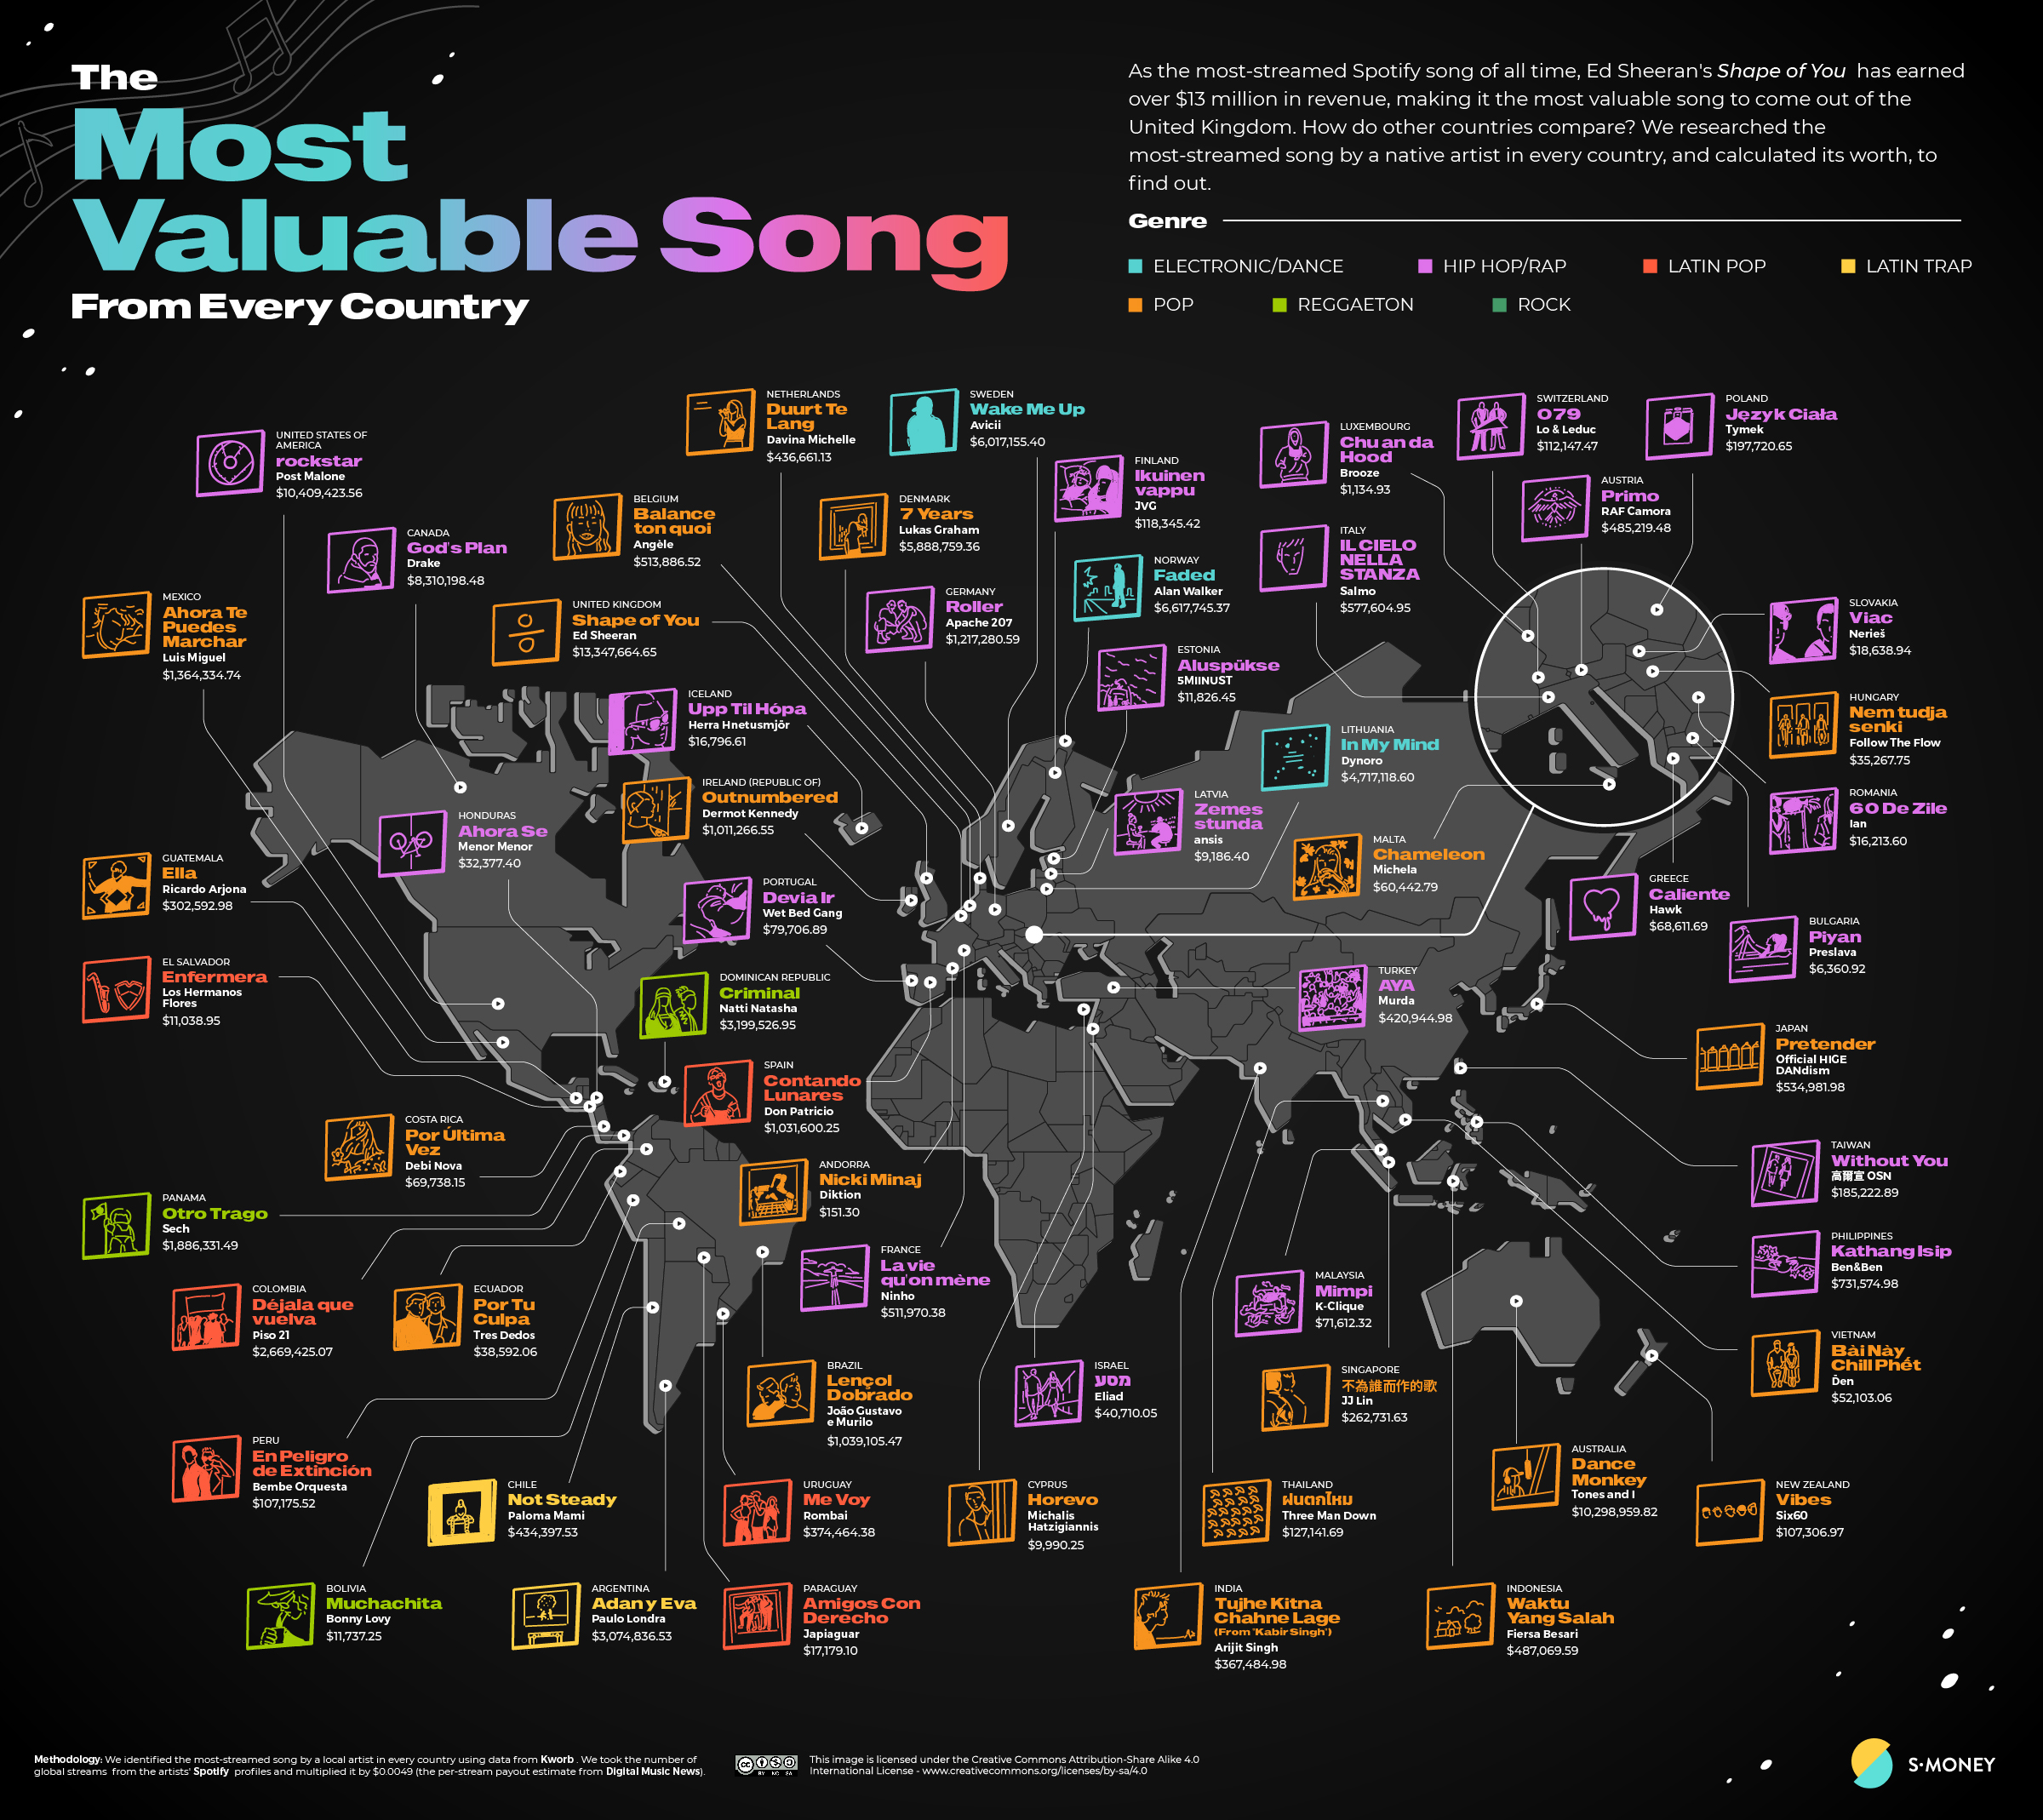 S-Money: The Most Valuable Song From Every Country World Map